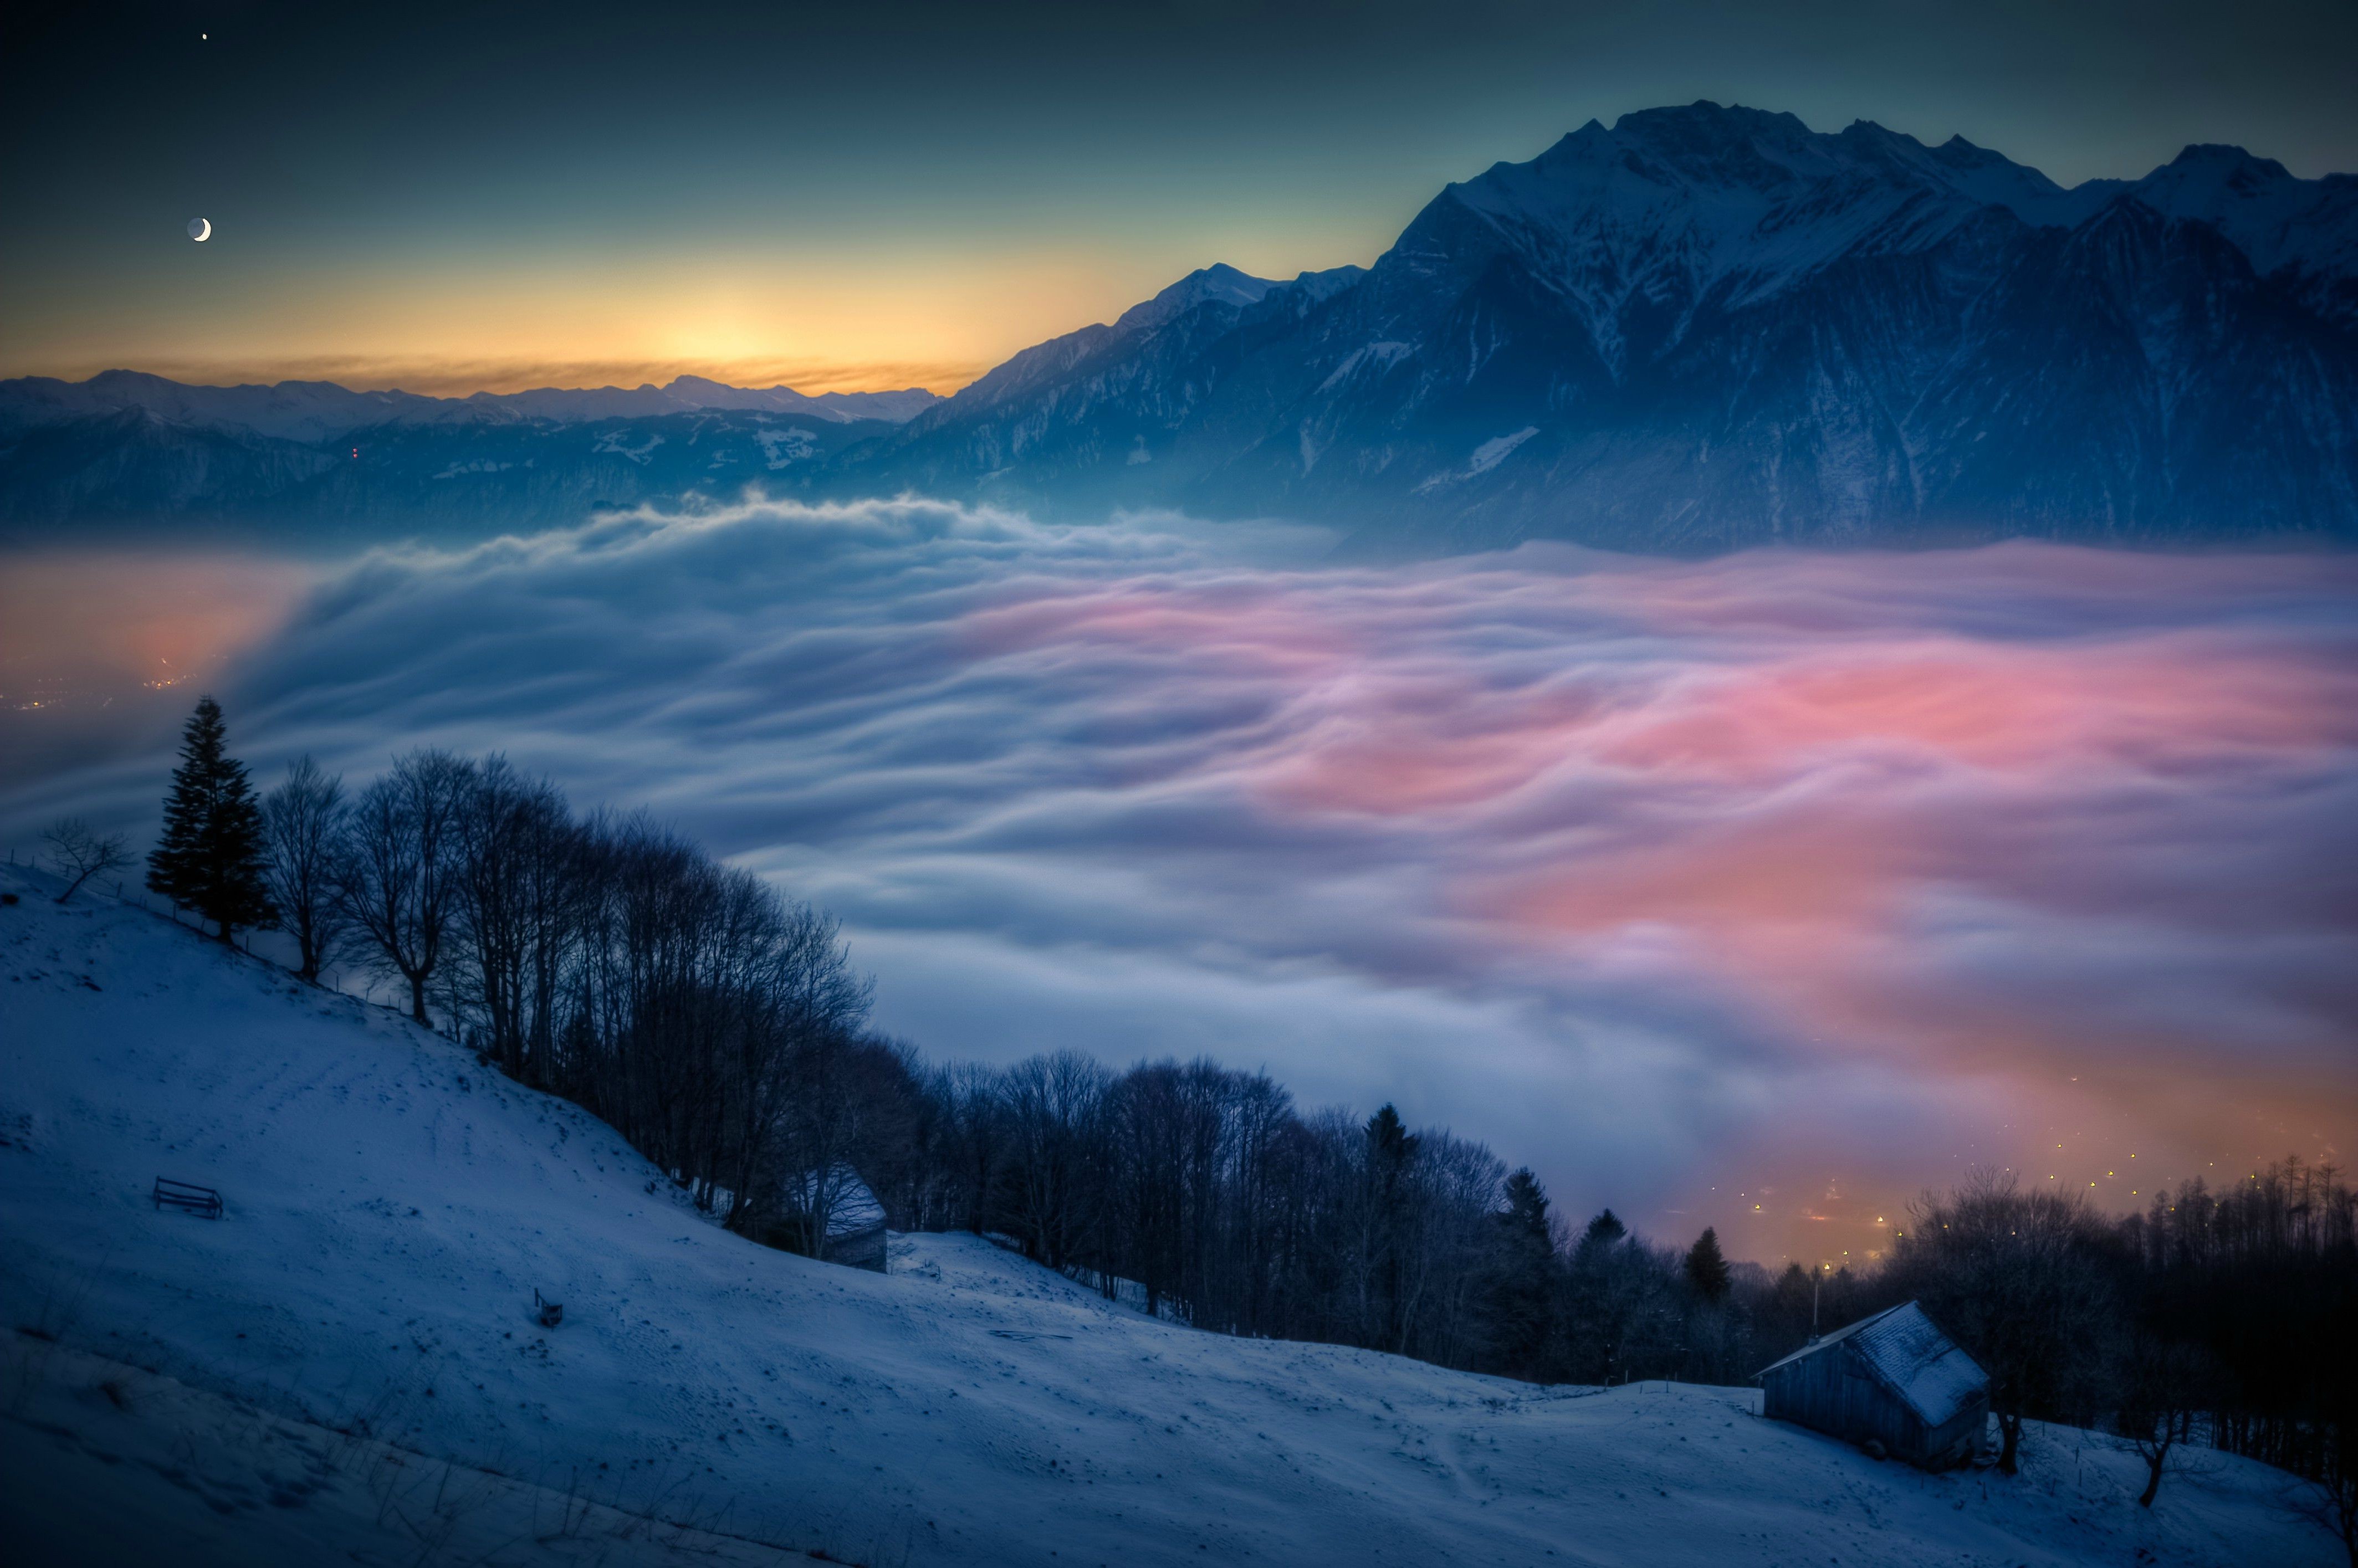 Snow Sunset Mountain Mist City Wallpapers Hd Desktop And Mobile